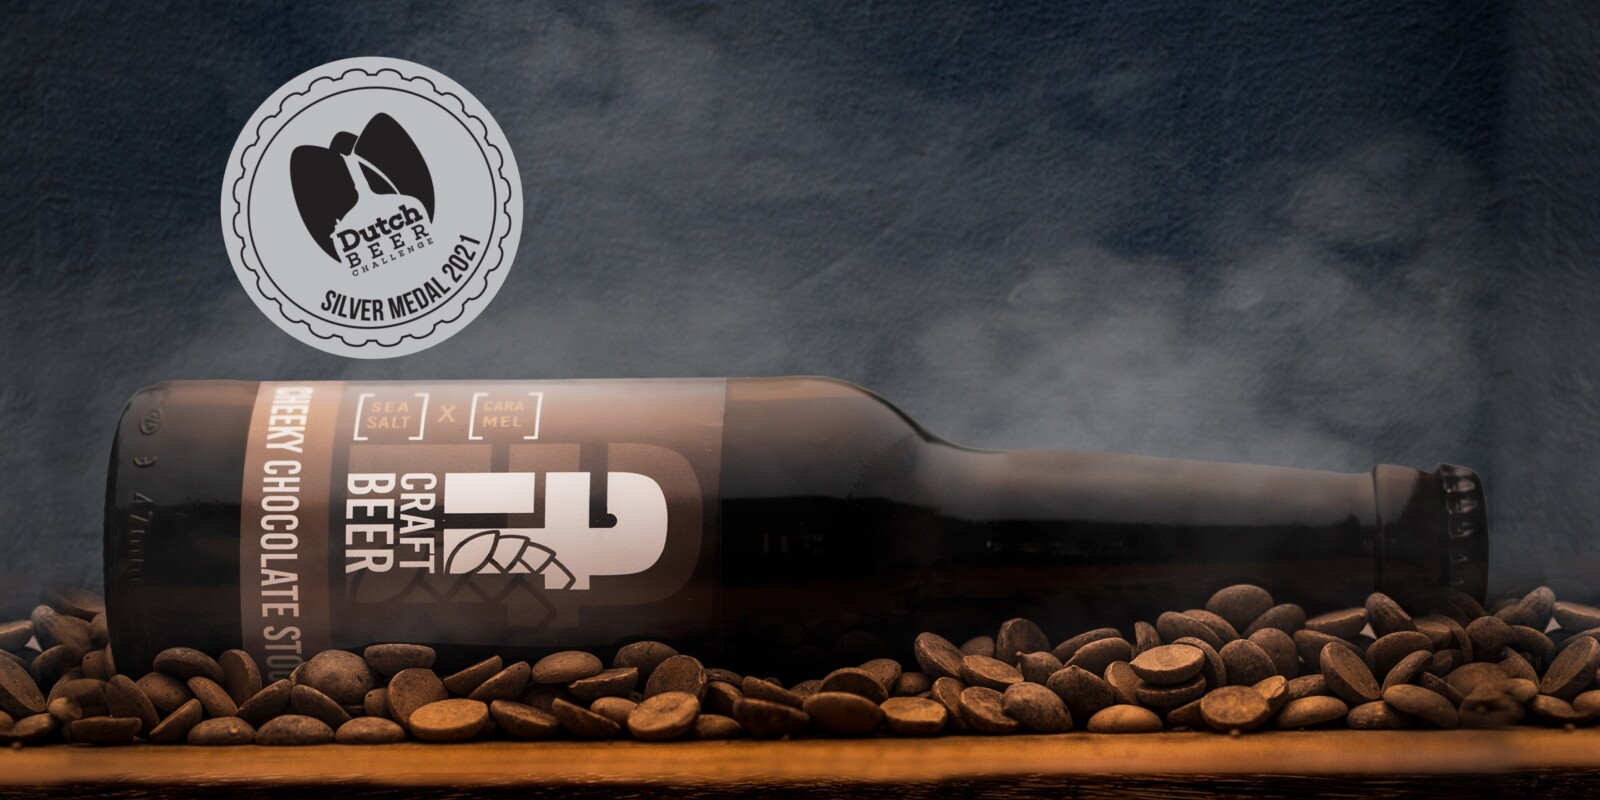 Cheeky Chocolate Stout winner in the Dutch Beer Challenge